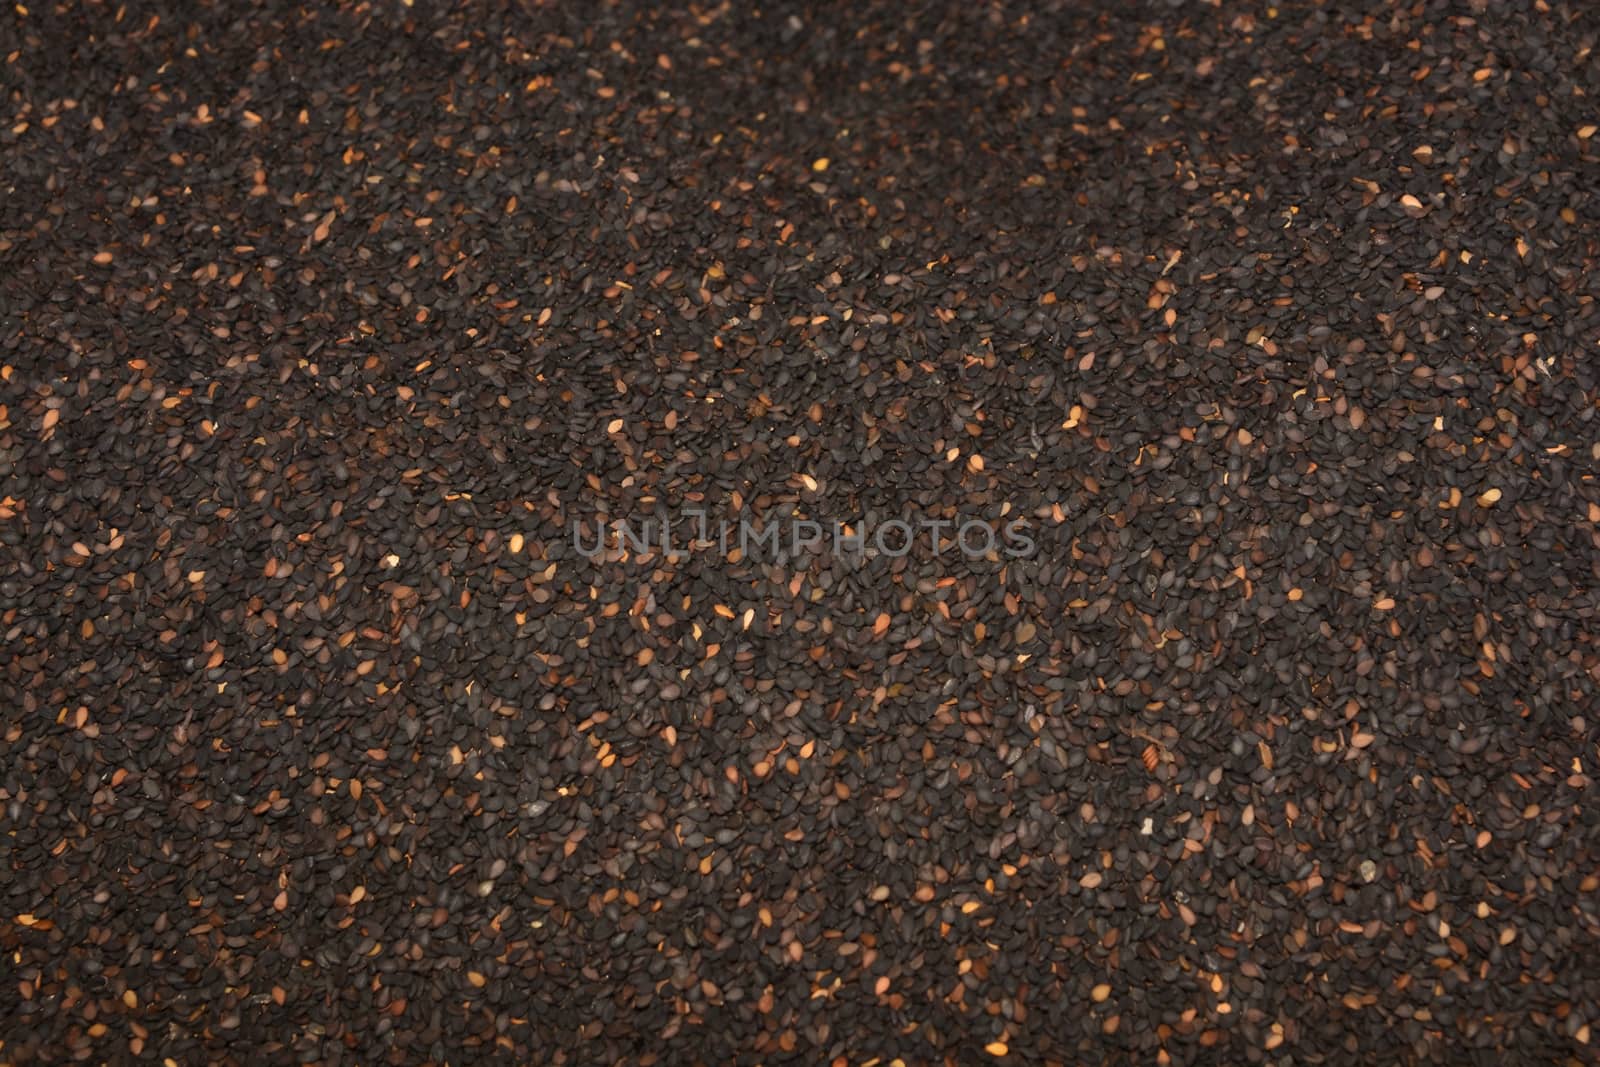 Black sesame seeds background, note select focus center of picture with shallow depth of field